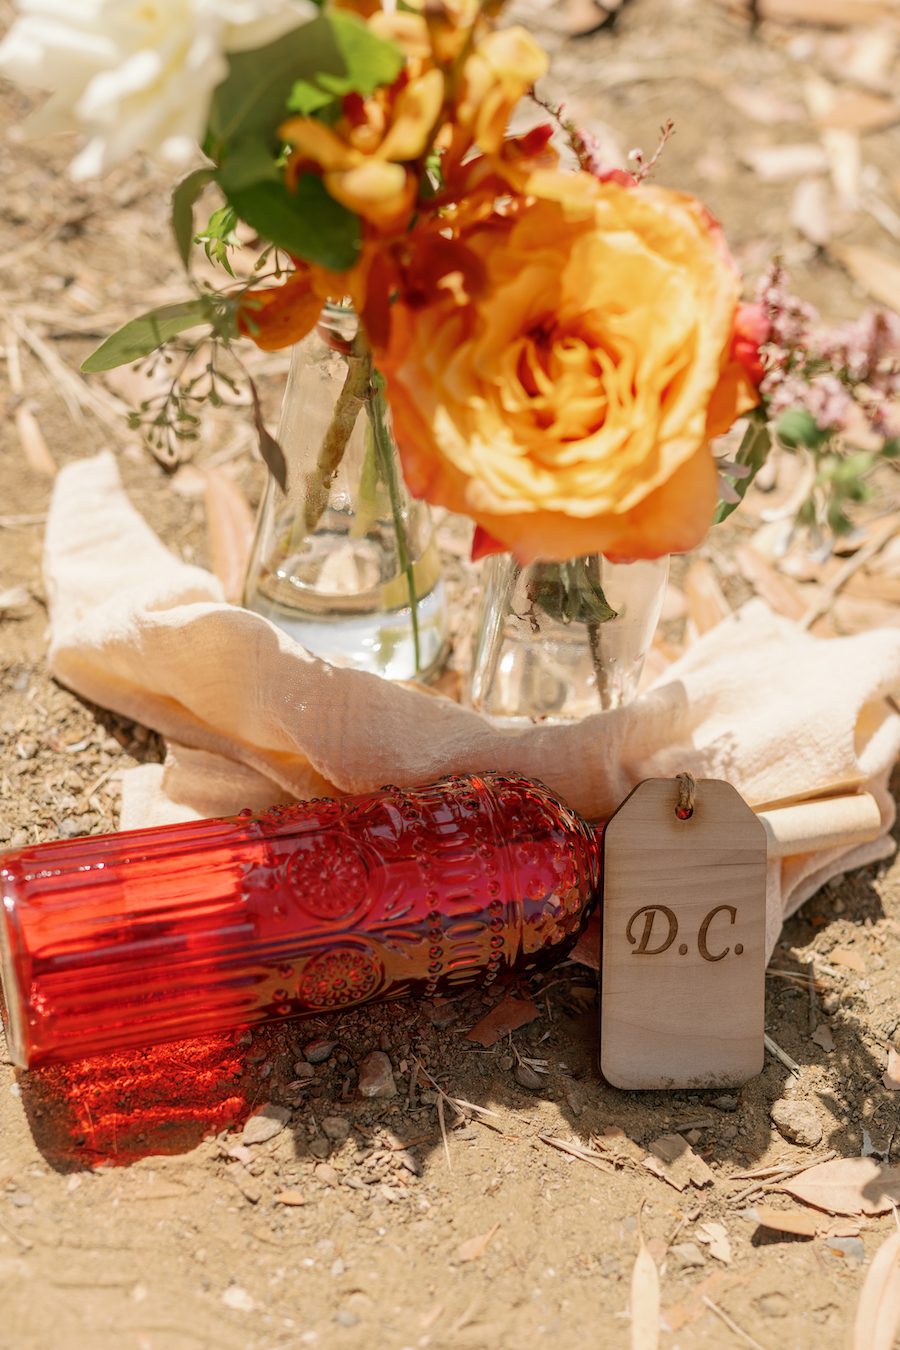 custom details from this private picnic proposal on catalina island 